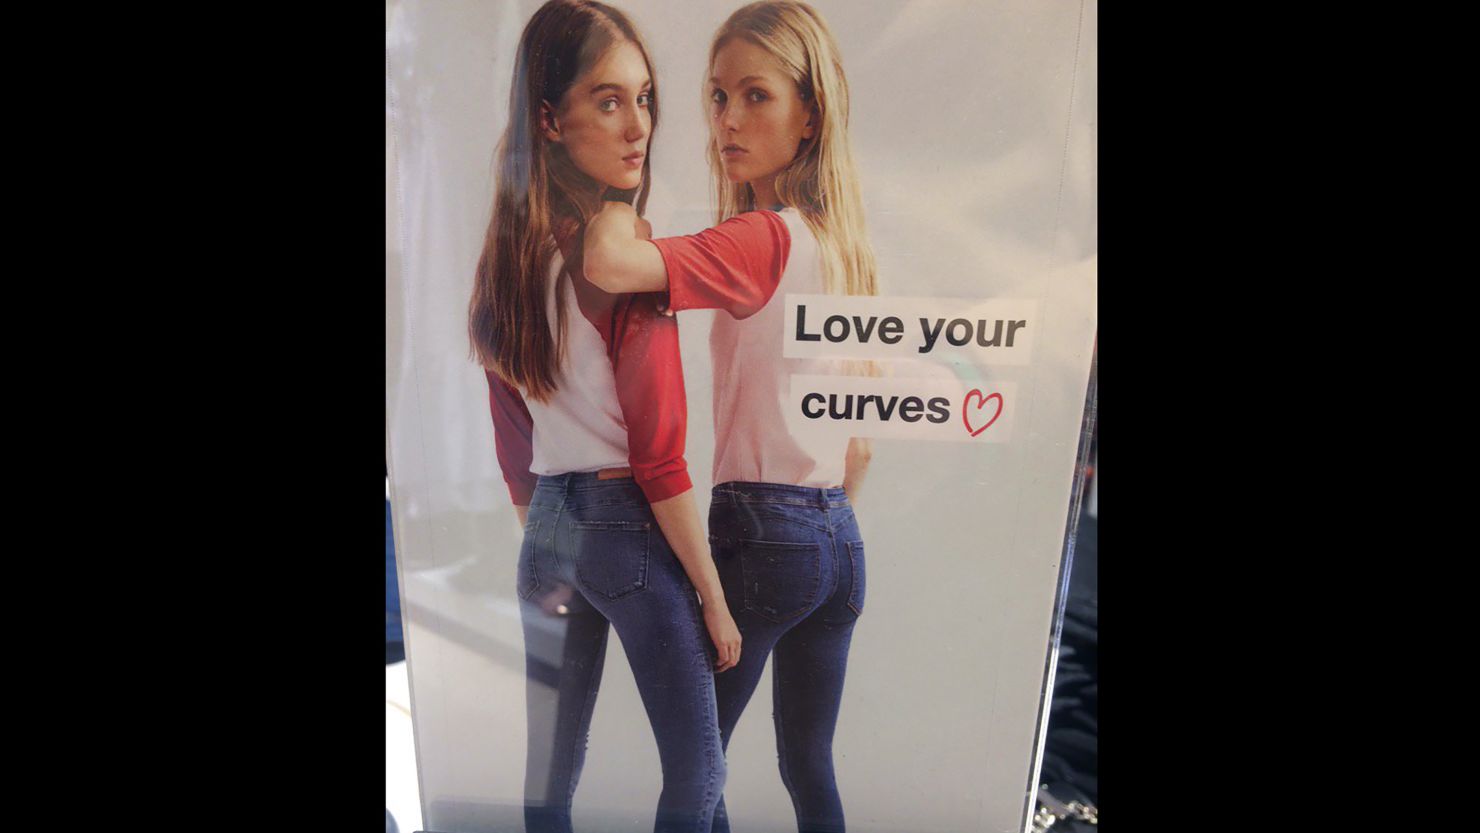 Zara 'love your curves' campaign sparks outrage